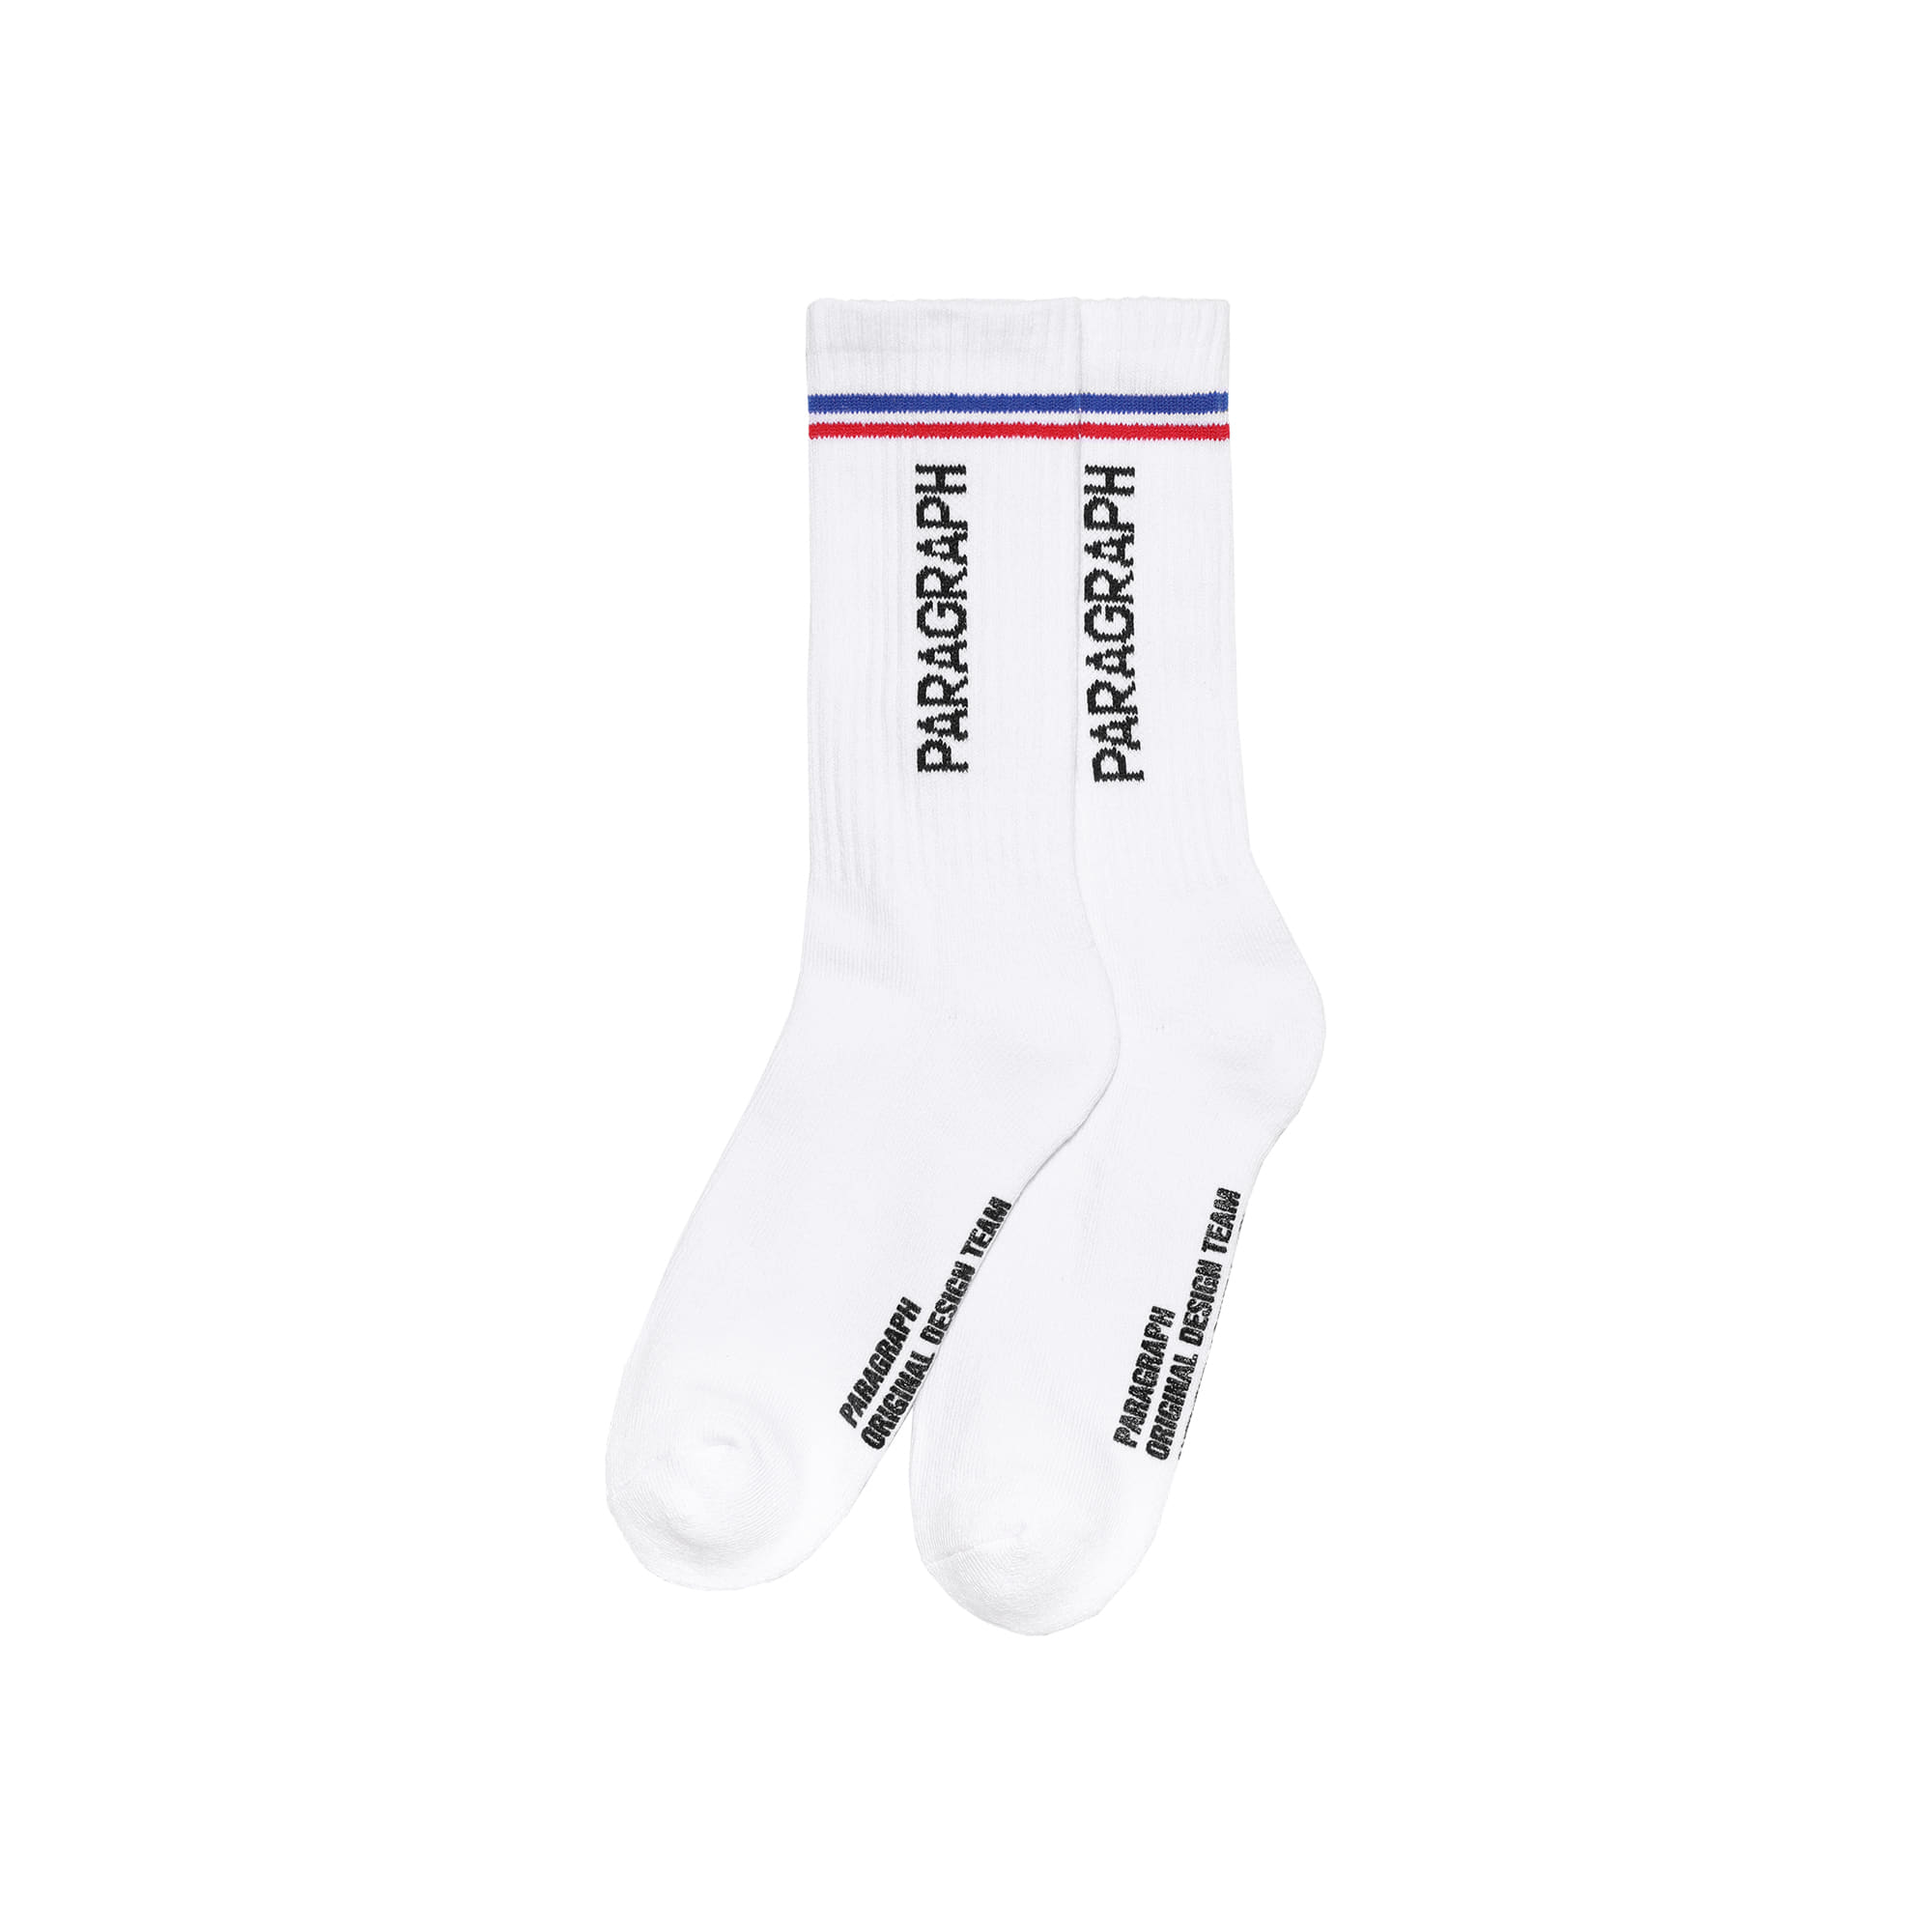 TWO LINES PARAGRAPH SOCKS